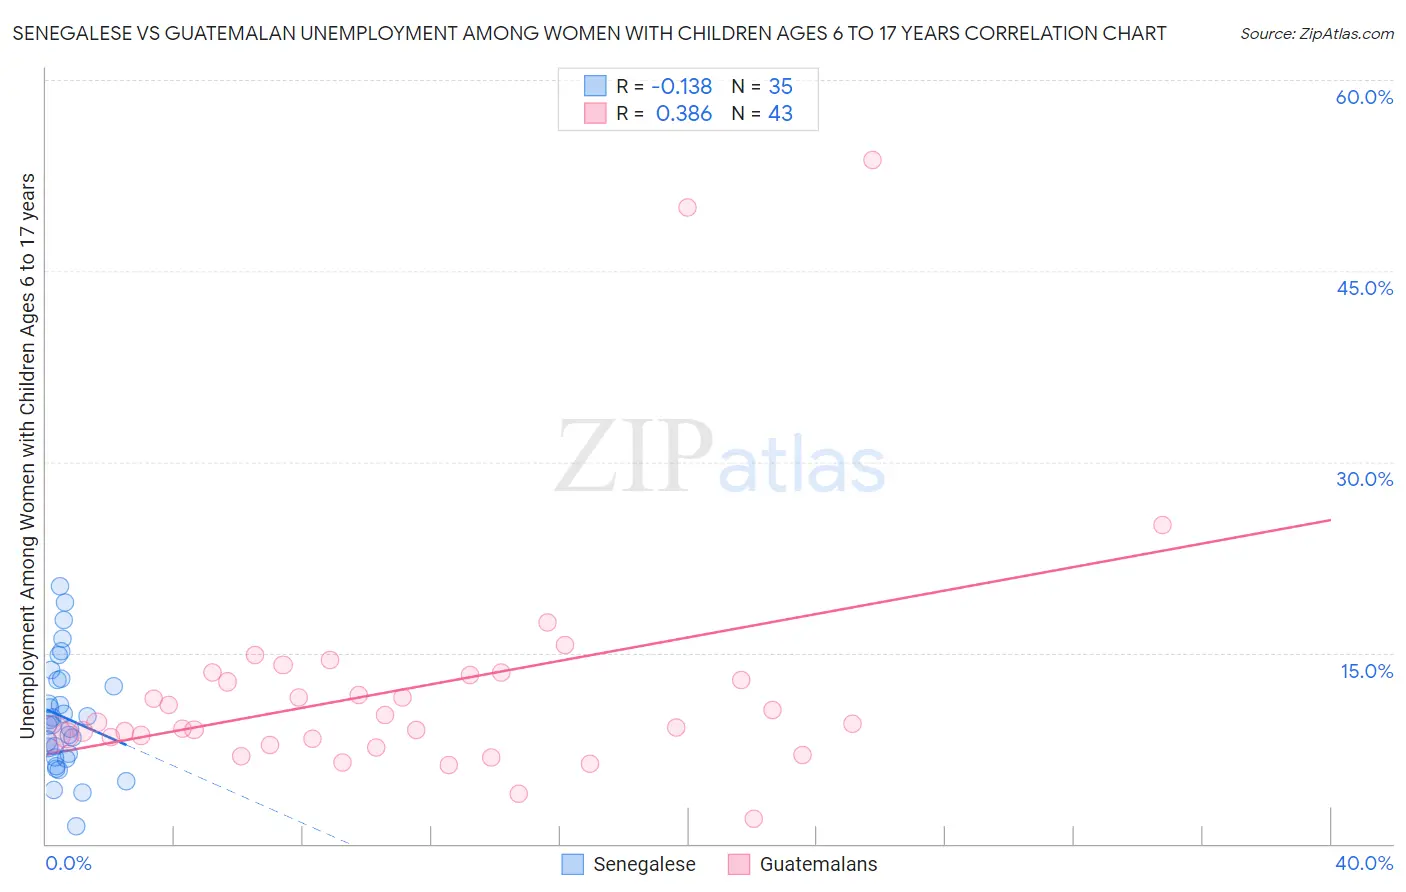 Senegalese vs Guatemalan Unemployment Among Women with Children Ages 6 to 17 years